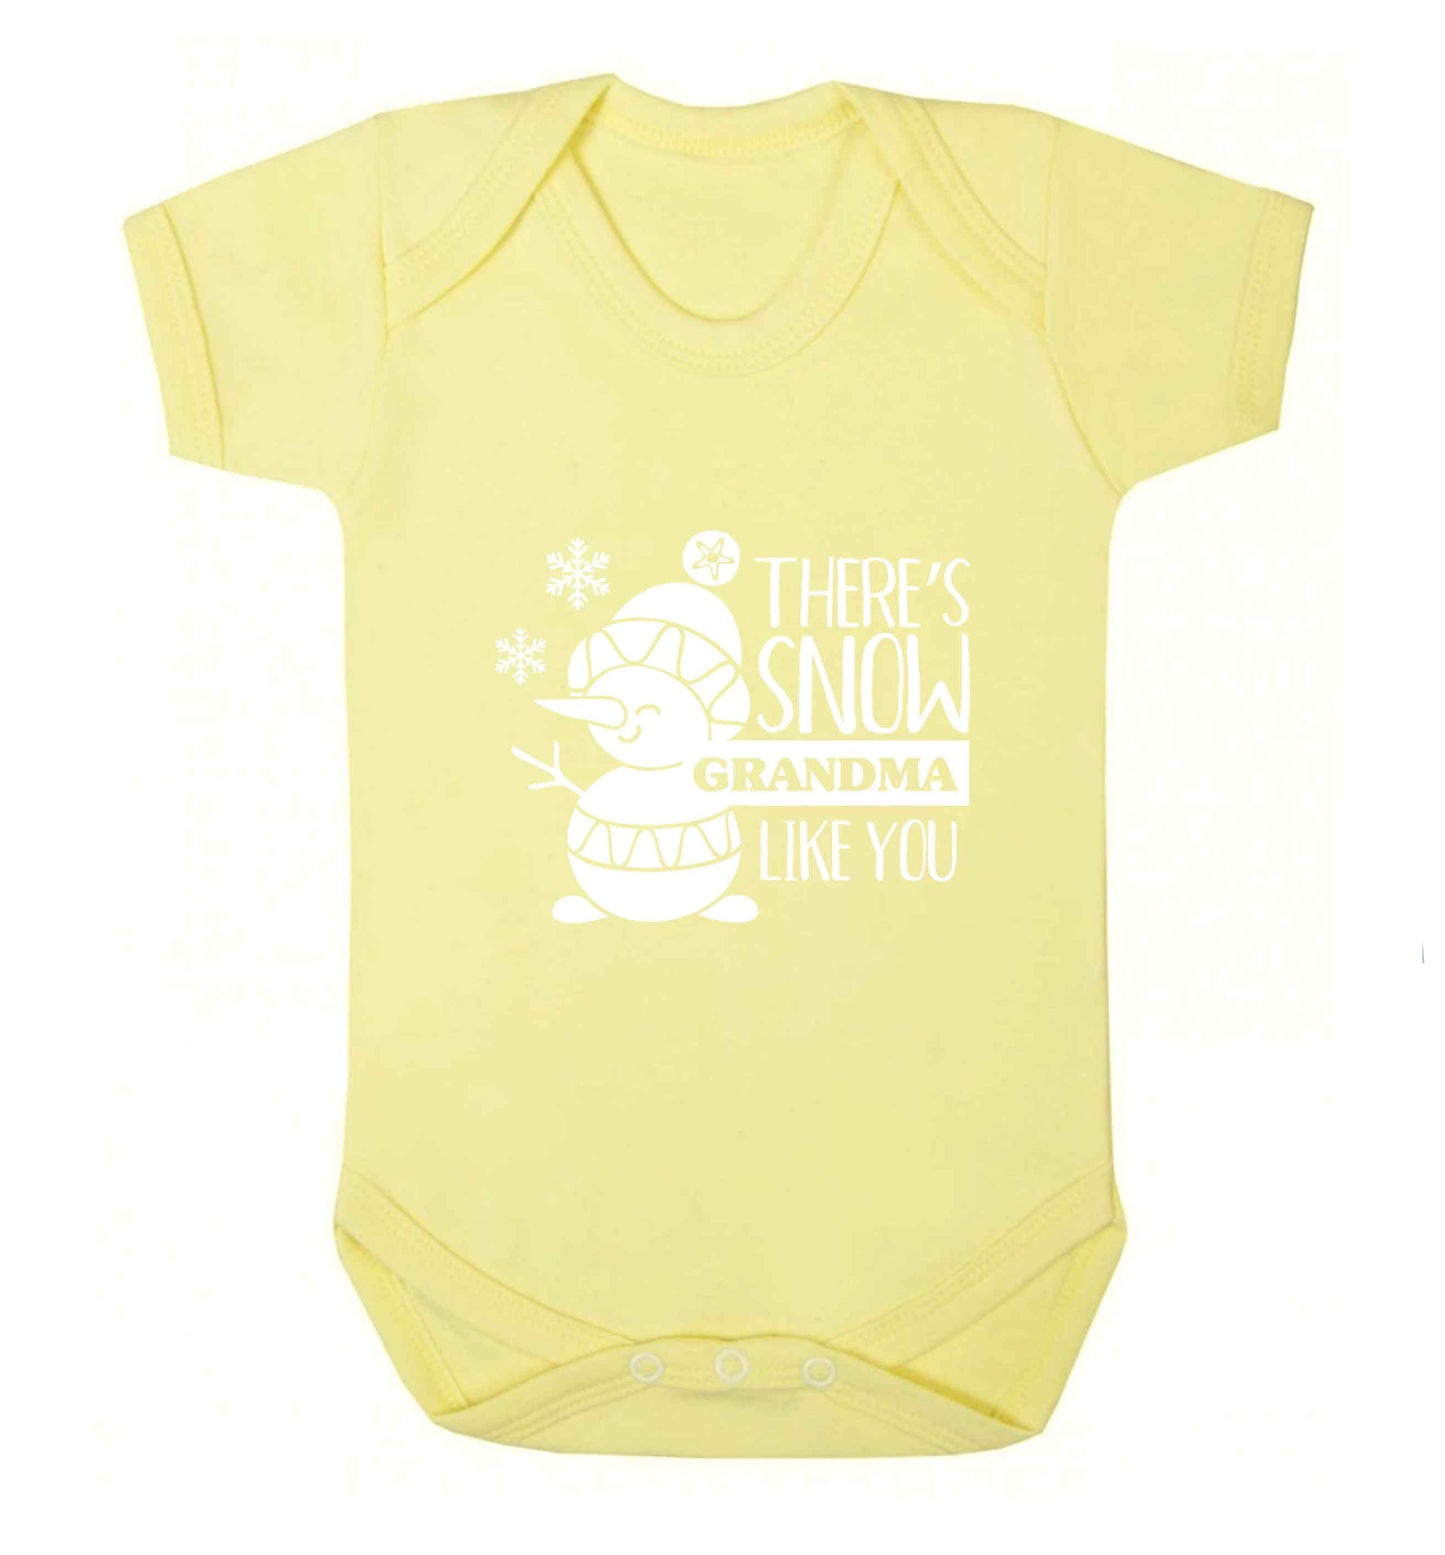 There's snow grandma like you baby vest pale yellow 18-24 months